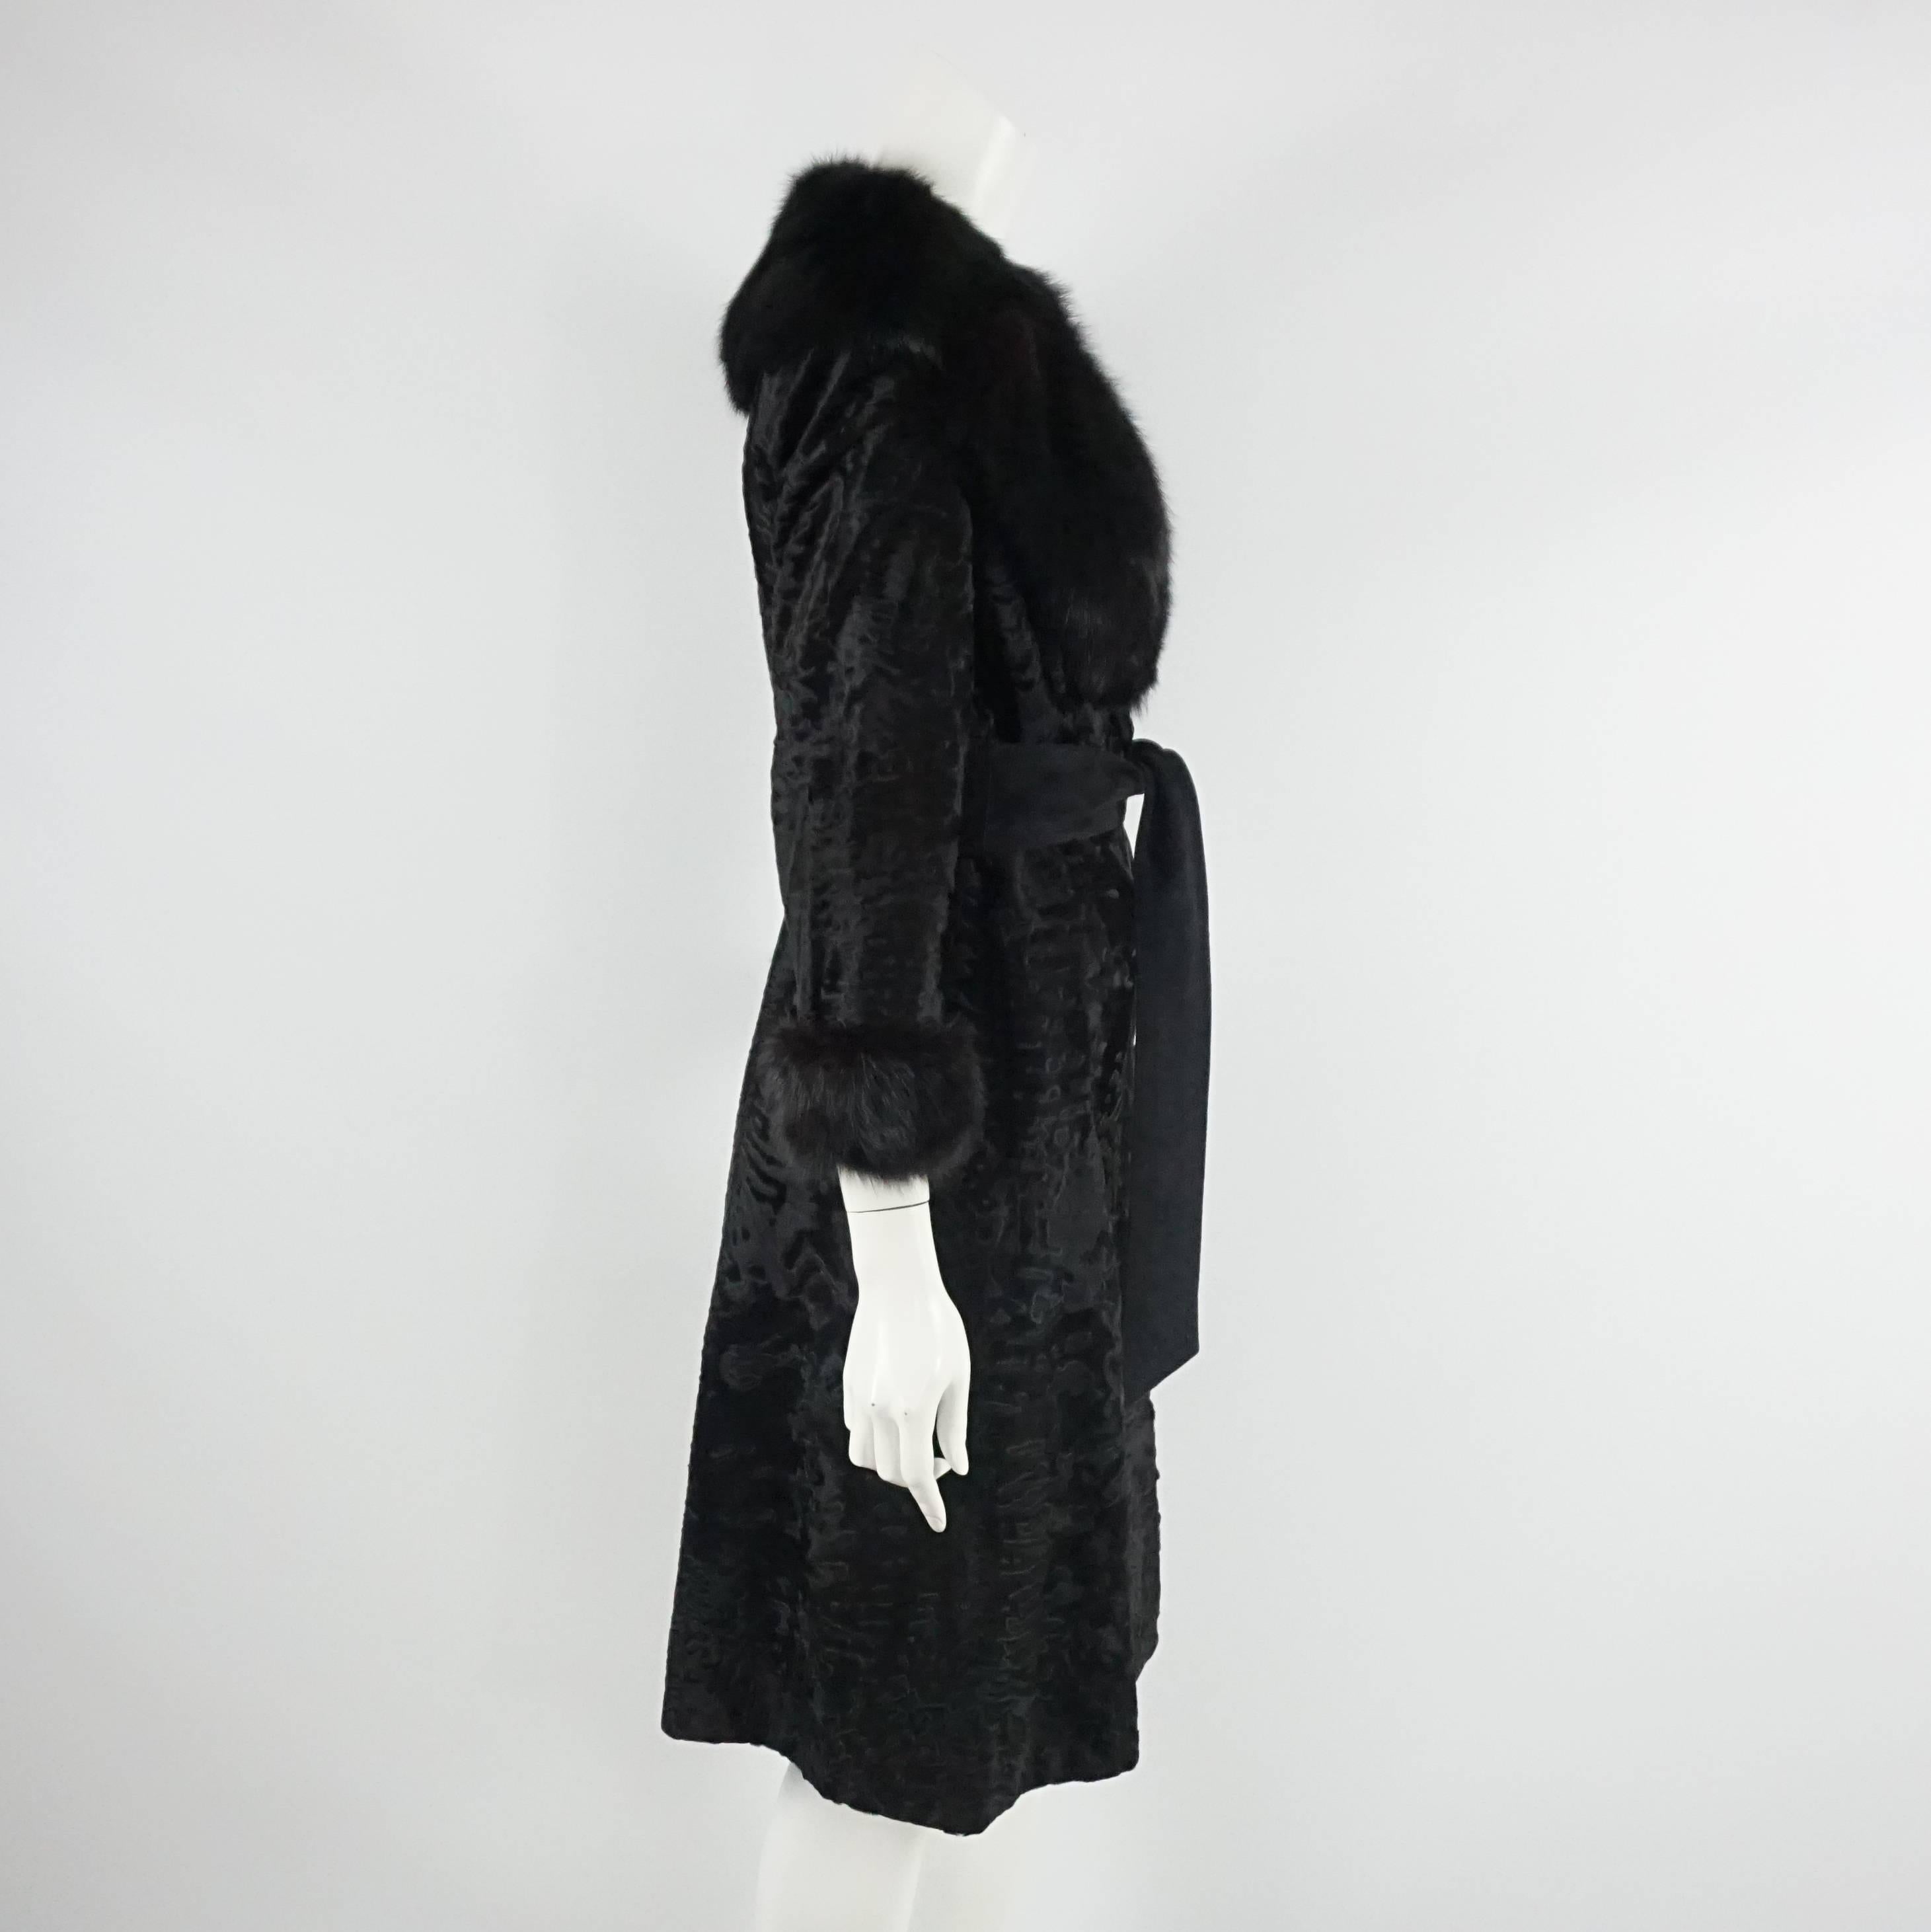 Birger Christensen Black Broadtail Coat with Large Fox Collar - M - Circa 90's This spectacular black broadtail coat 3/4 coat has a striking fox collar and cuffs. It has two hook an eye closures at the chest and waist (crosses over slightly), side